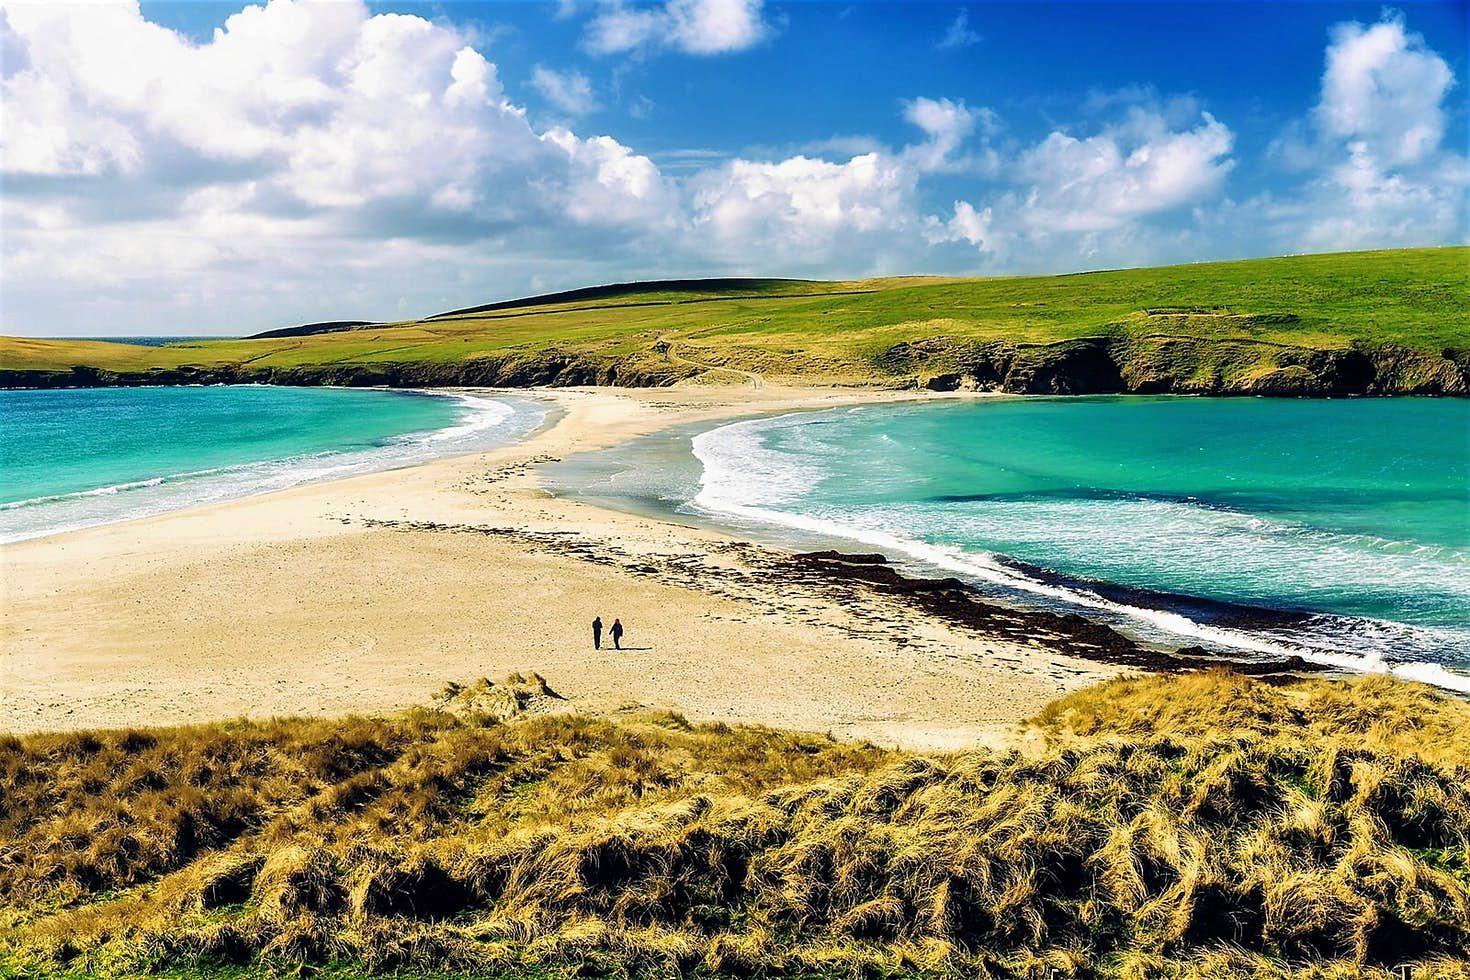 The Shetland Islands in Scotland are the most northerly point in the UK in which to venture